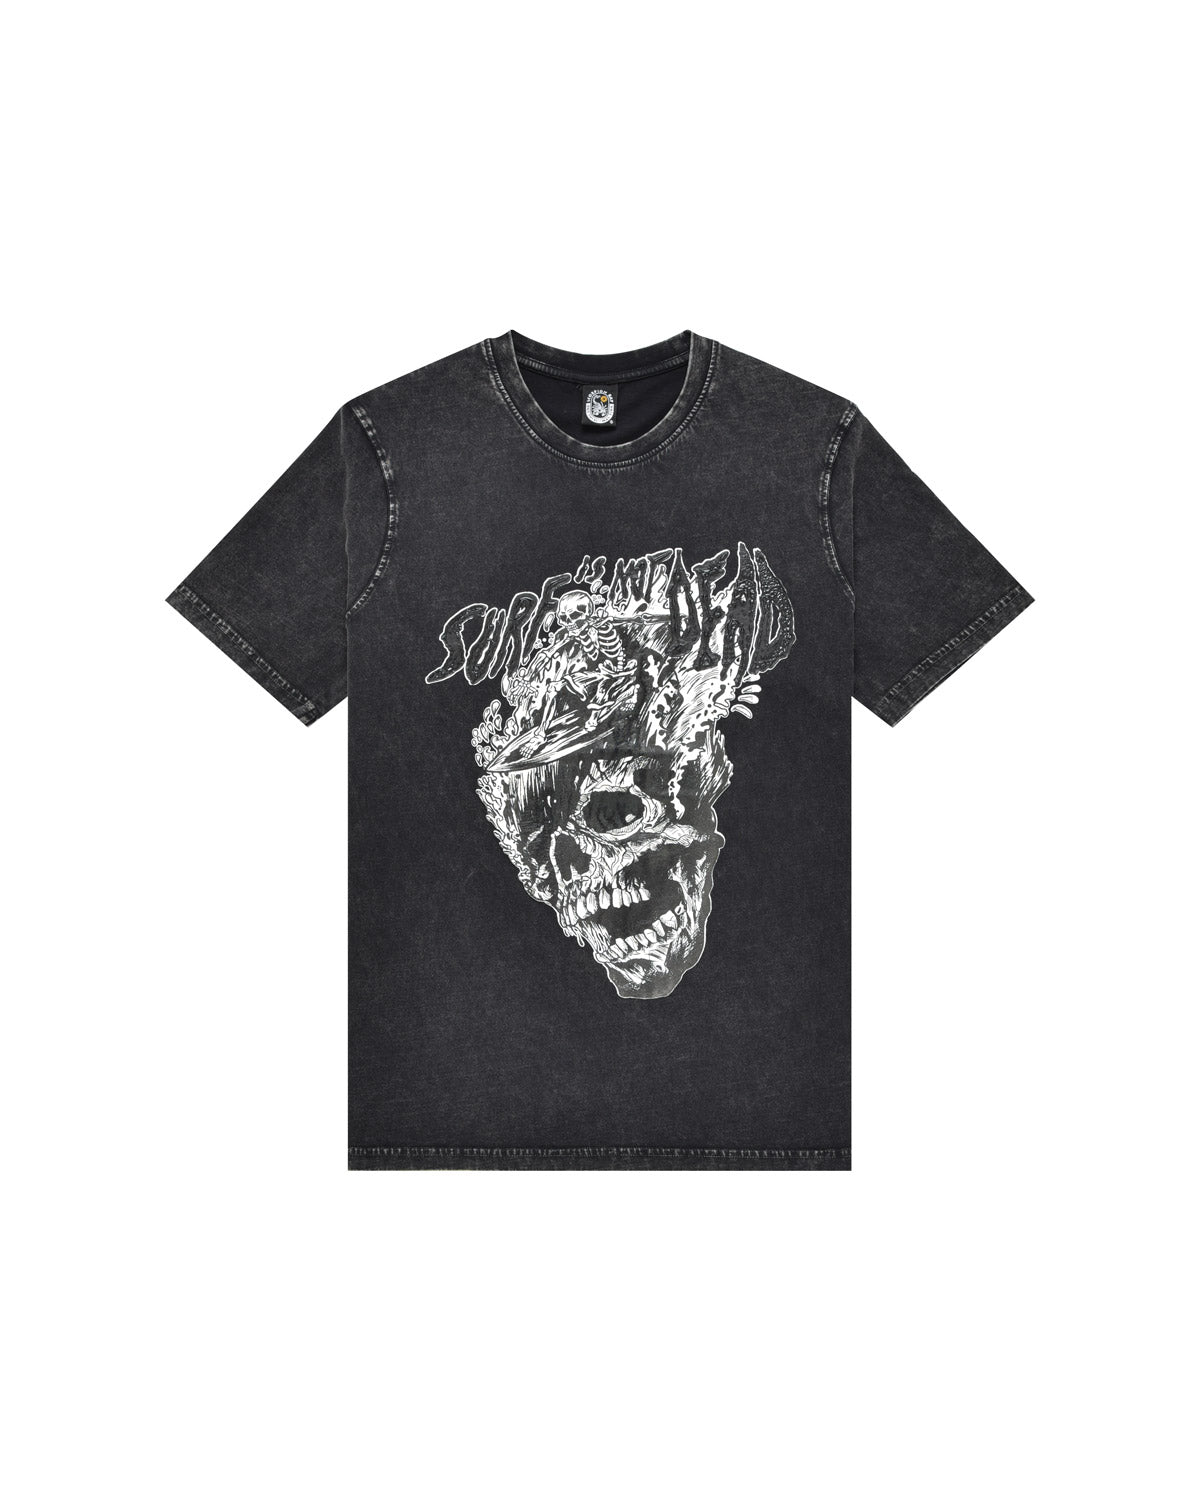 Man | Black T-Shirt "Surf Is Not Dead" Washed Effect